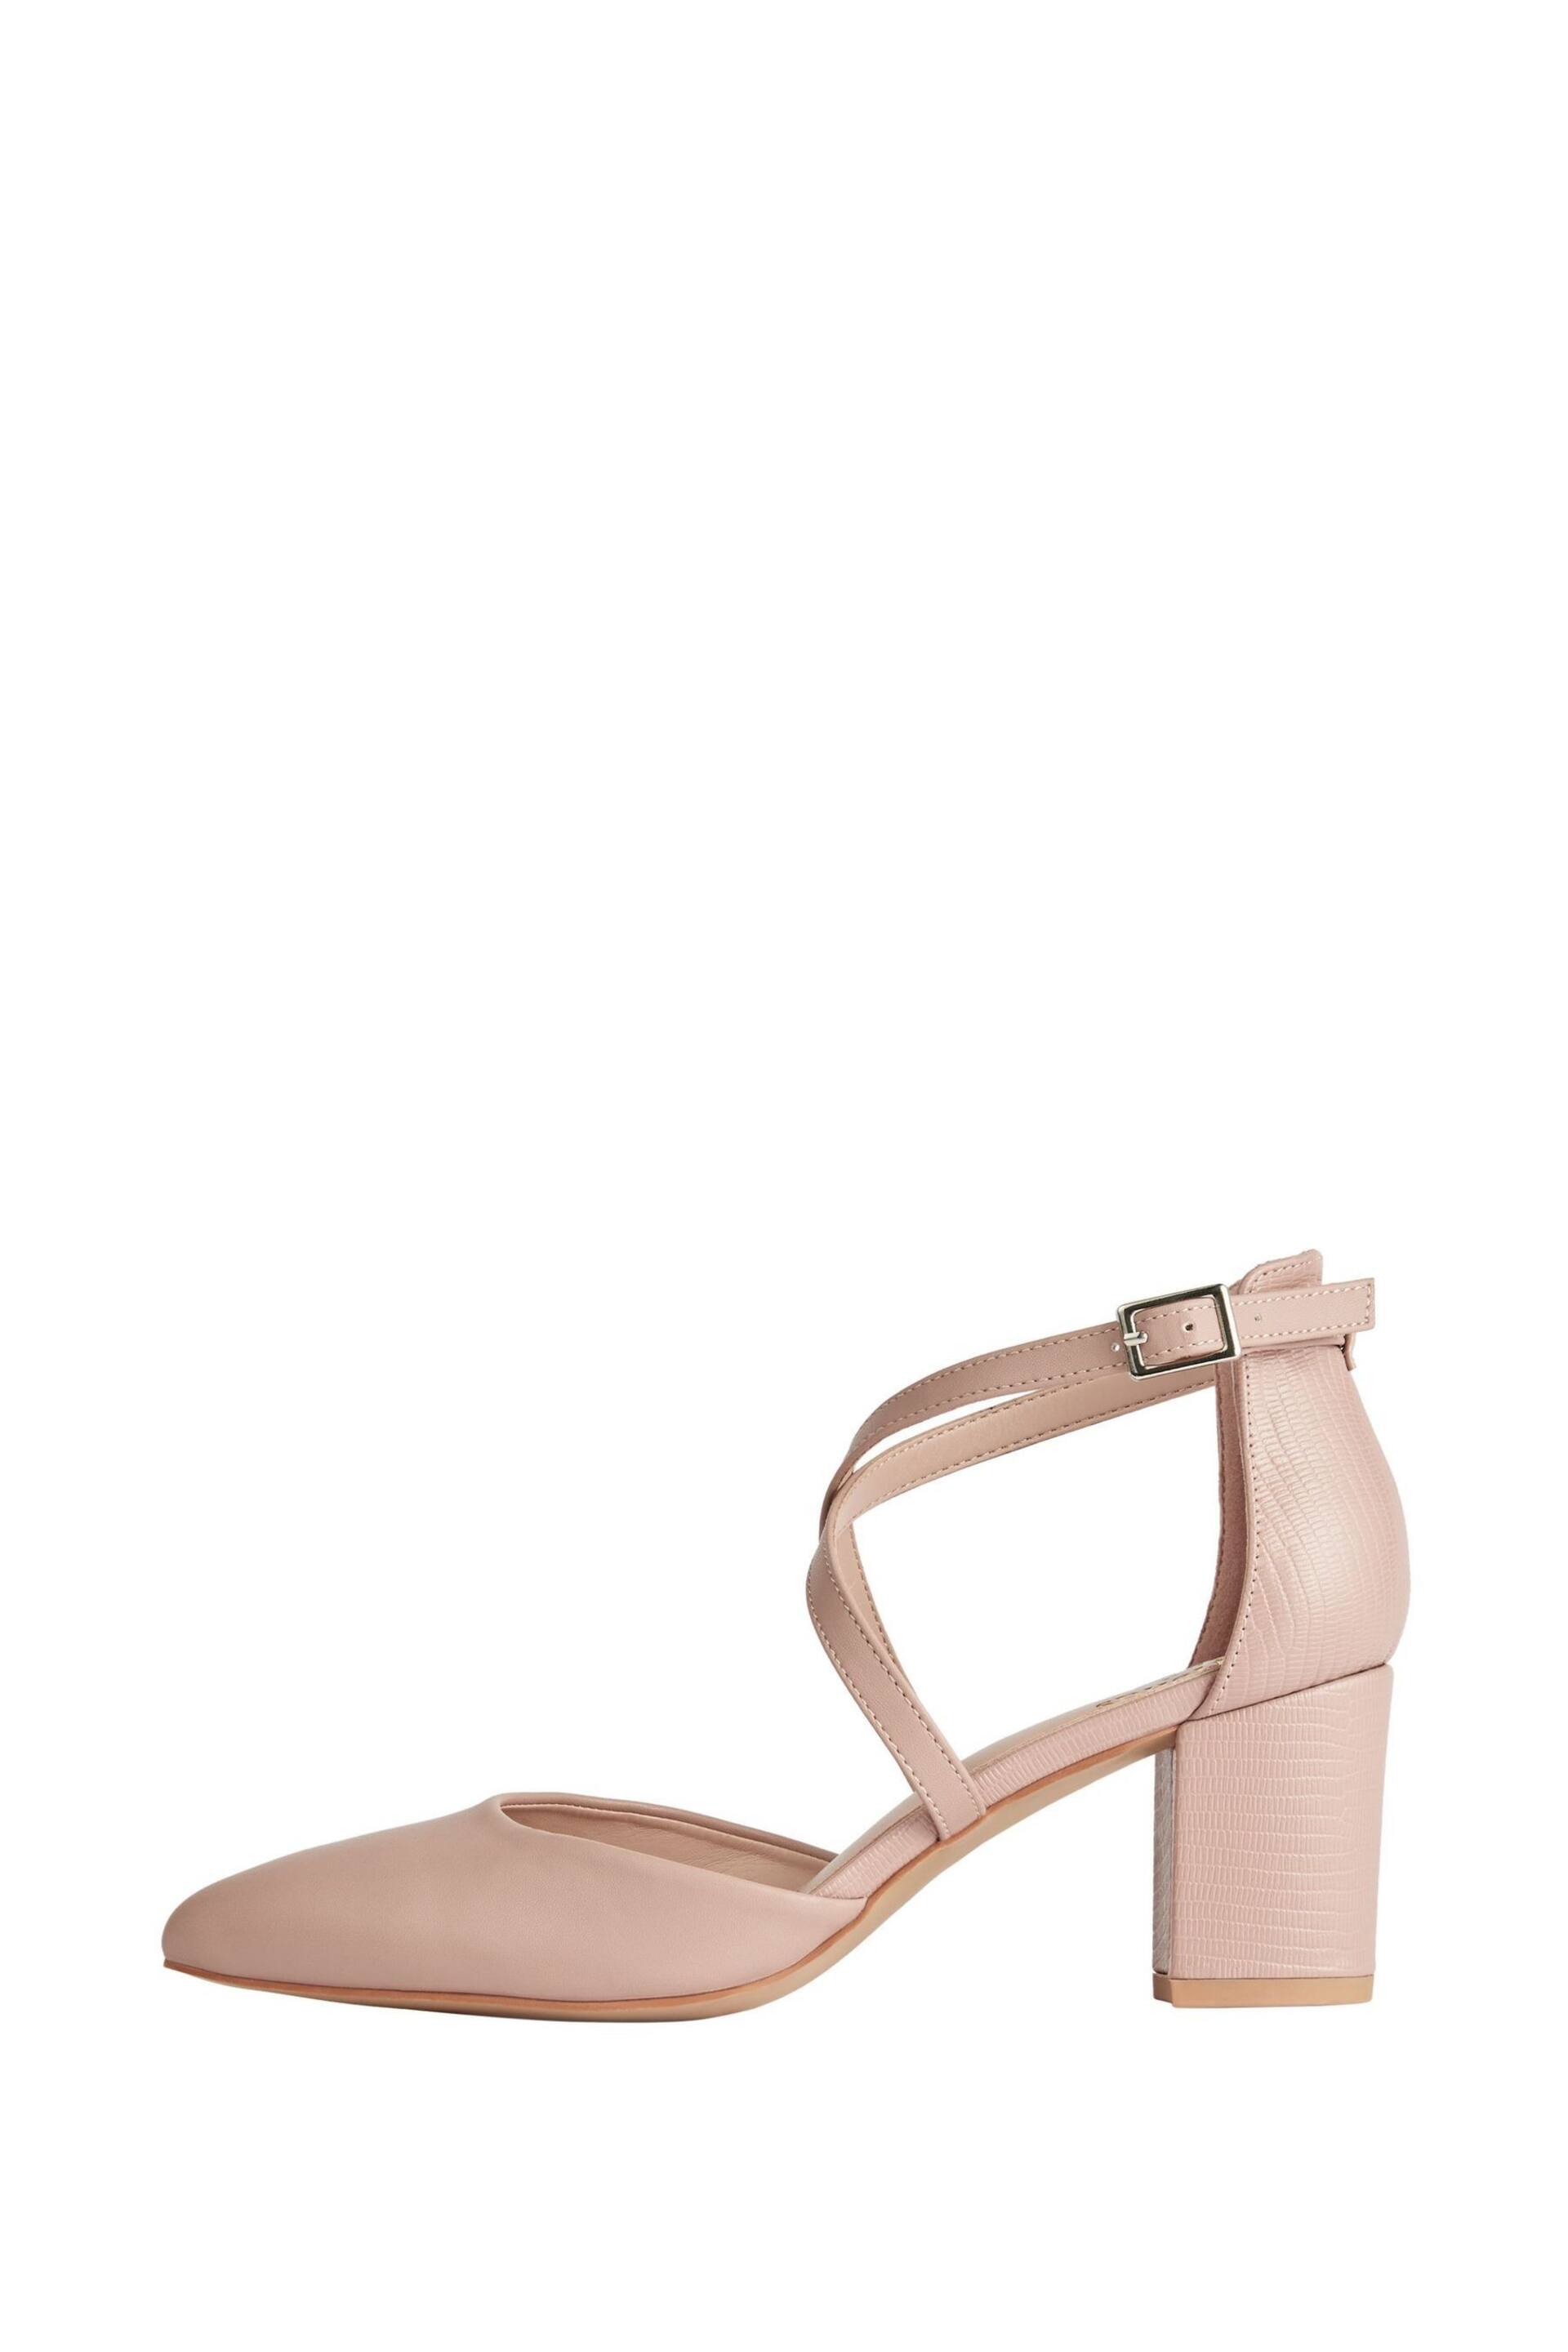 Friends Like These Nude Pink Regular Fit Cross Over Mid Court Block Heel Shoes - Image 1 of 4